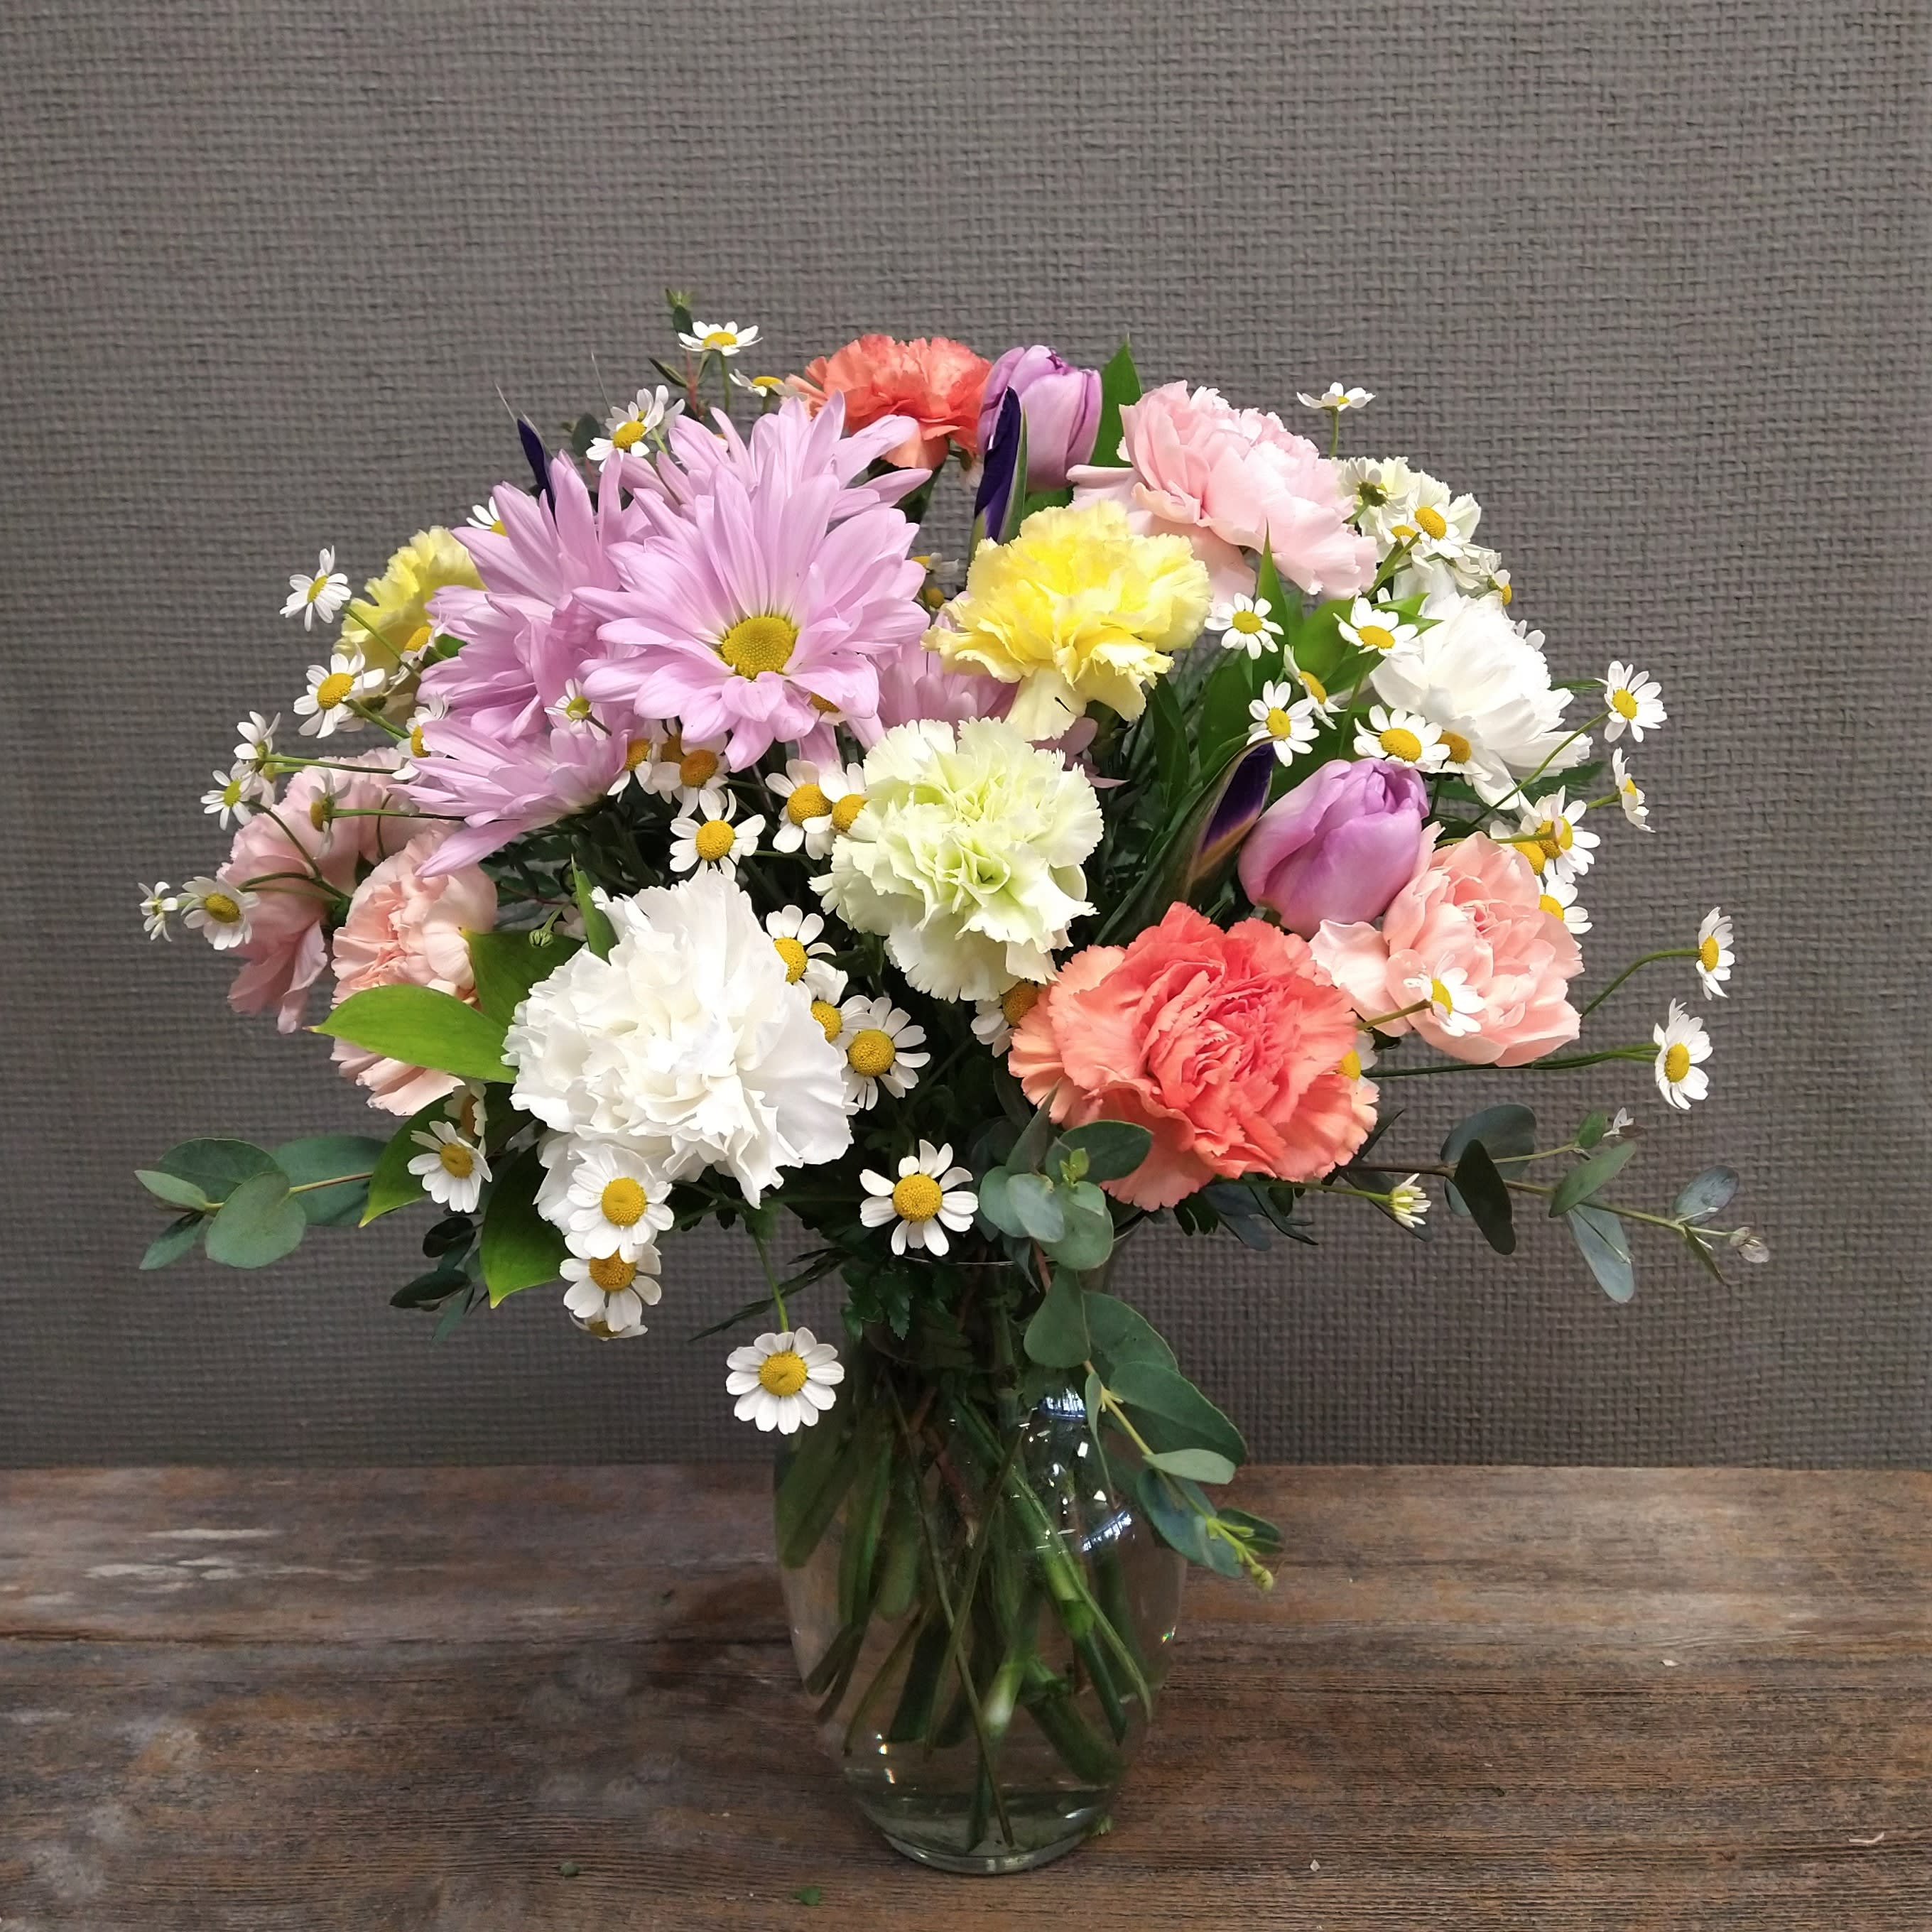 Spring is All Around - Spring has sprung! This pastel rainbow has carnations, tulips, and iris that gives a fun, uplifting boost for any occasion.